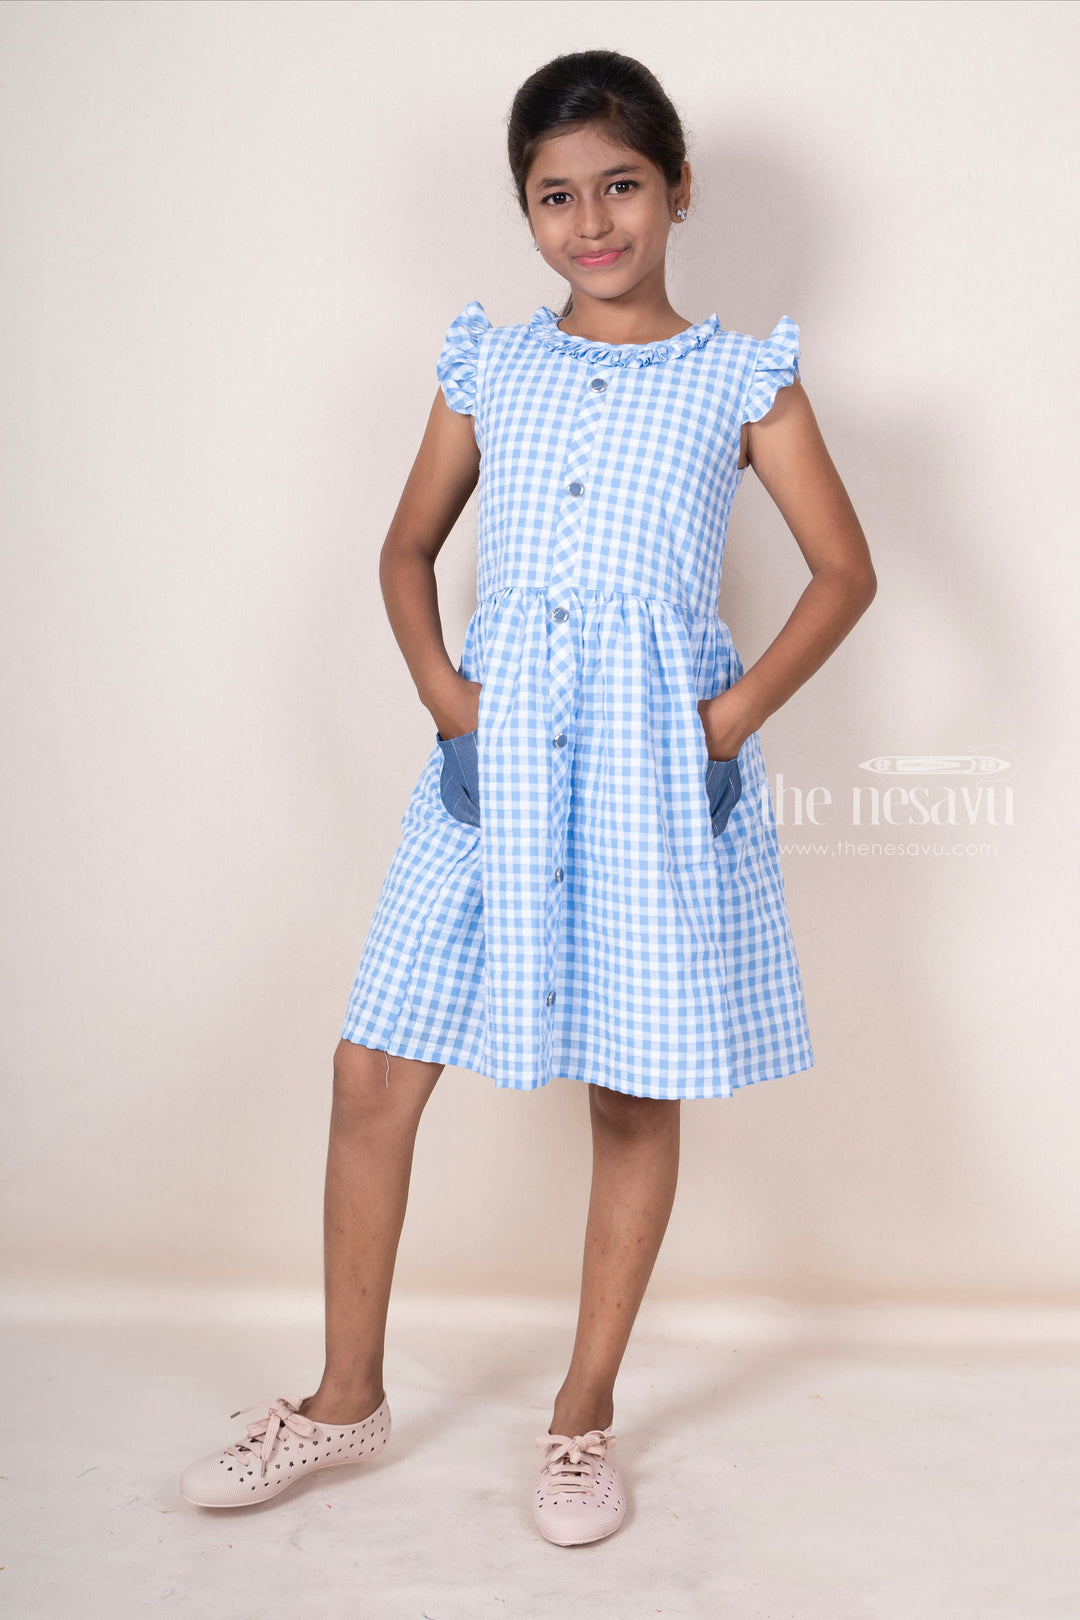 The Nesavu Frocks & Dresses Blue Soft Cotton Checked Casual Frock With Ruffled Sleeves And Pockets psr silks Nesavu 22 (4Y) / blue GFC914A